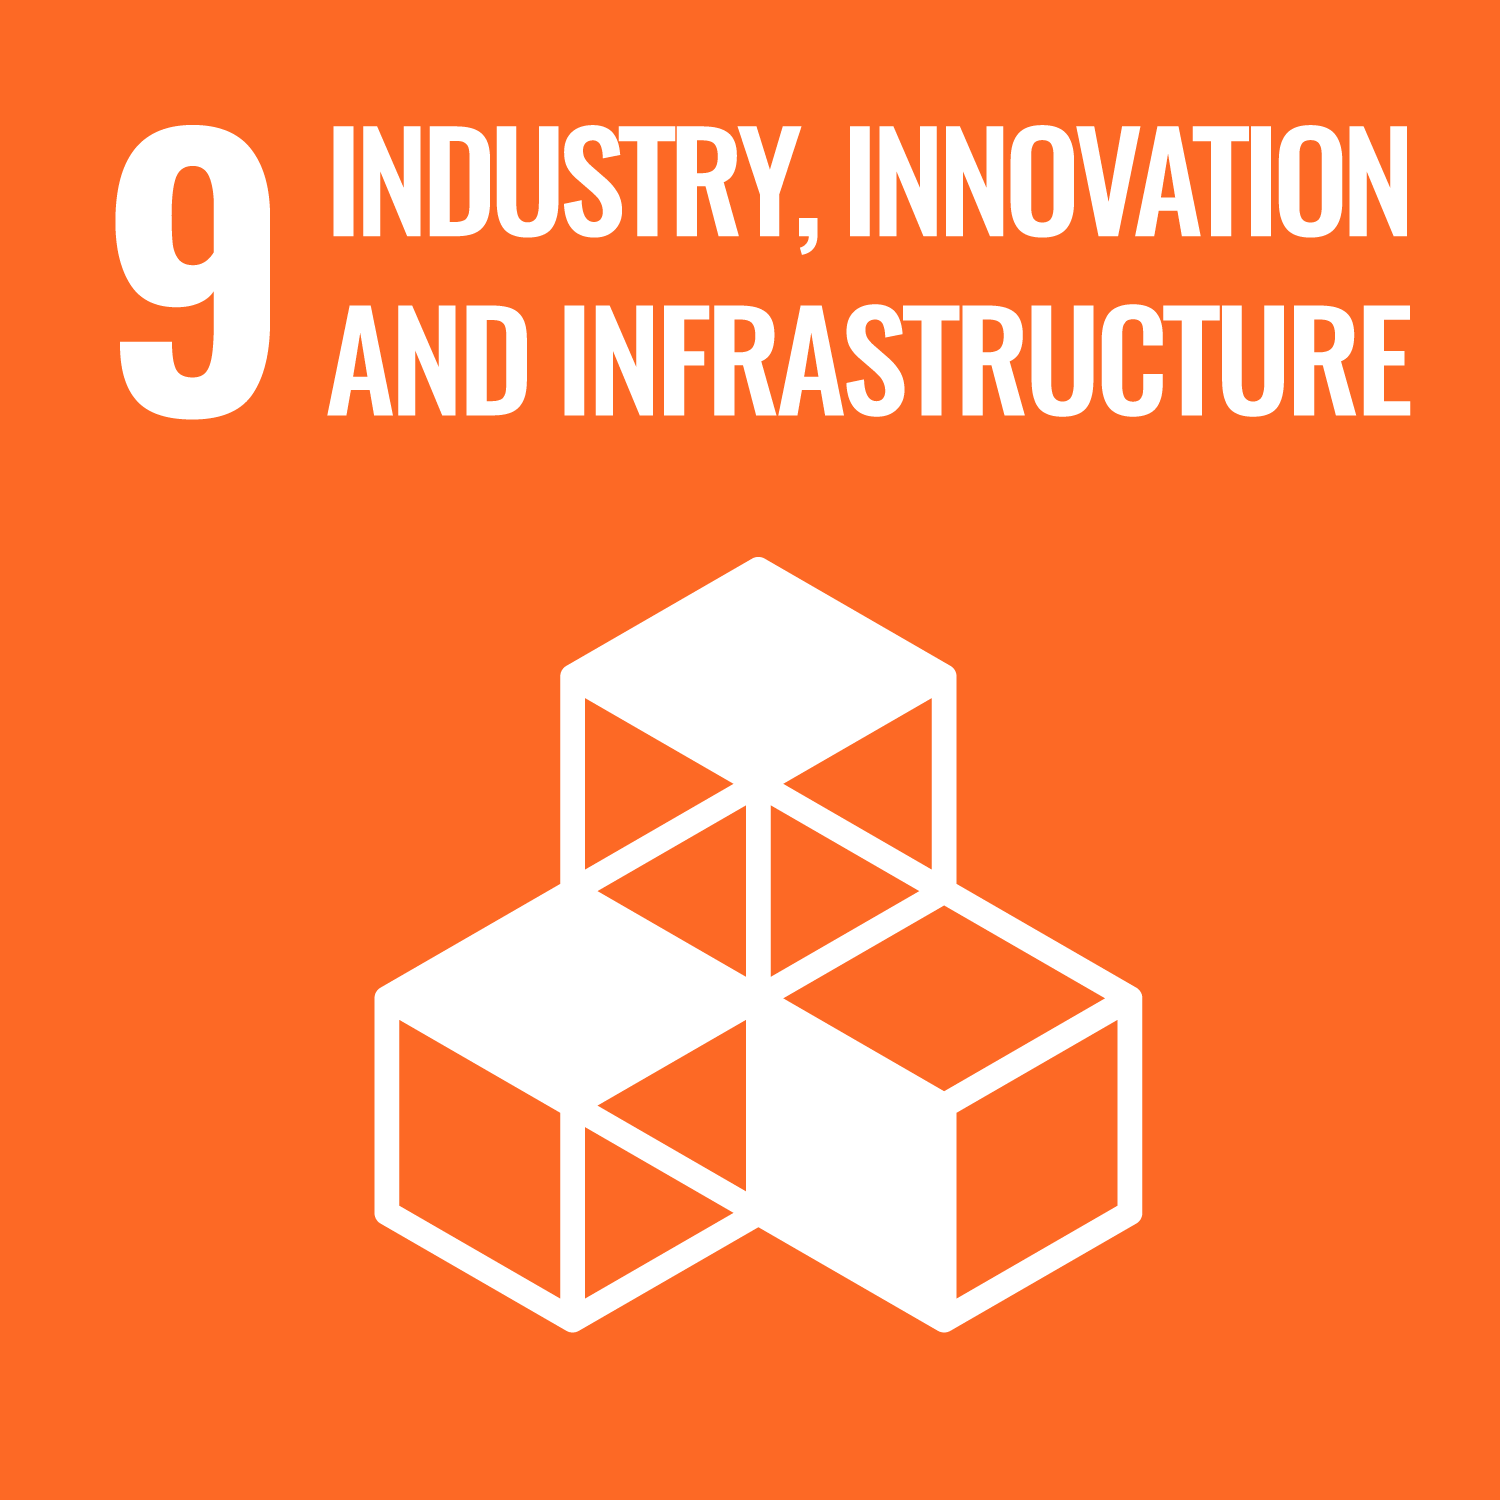 9 INDUSTRY, INNOVATION, AND INFRASTRUCTURE